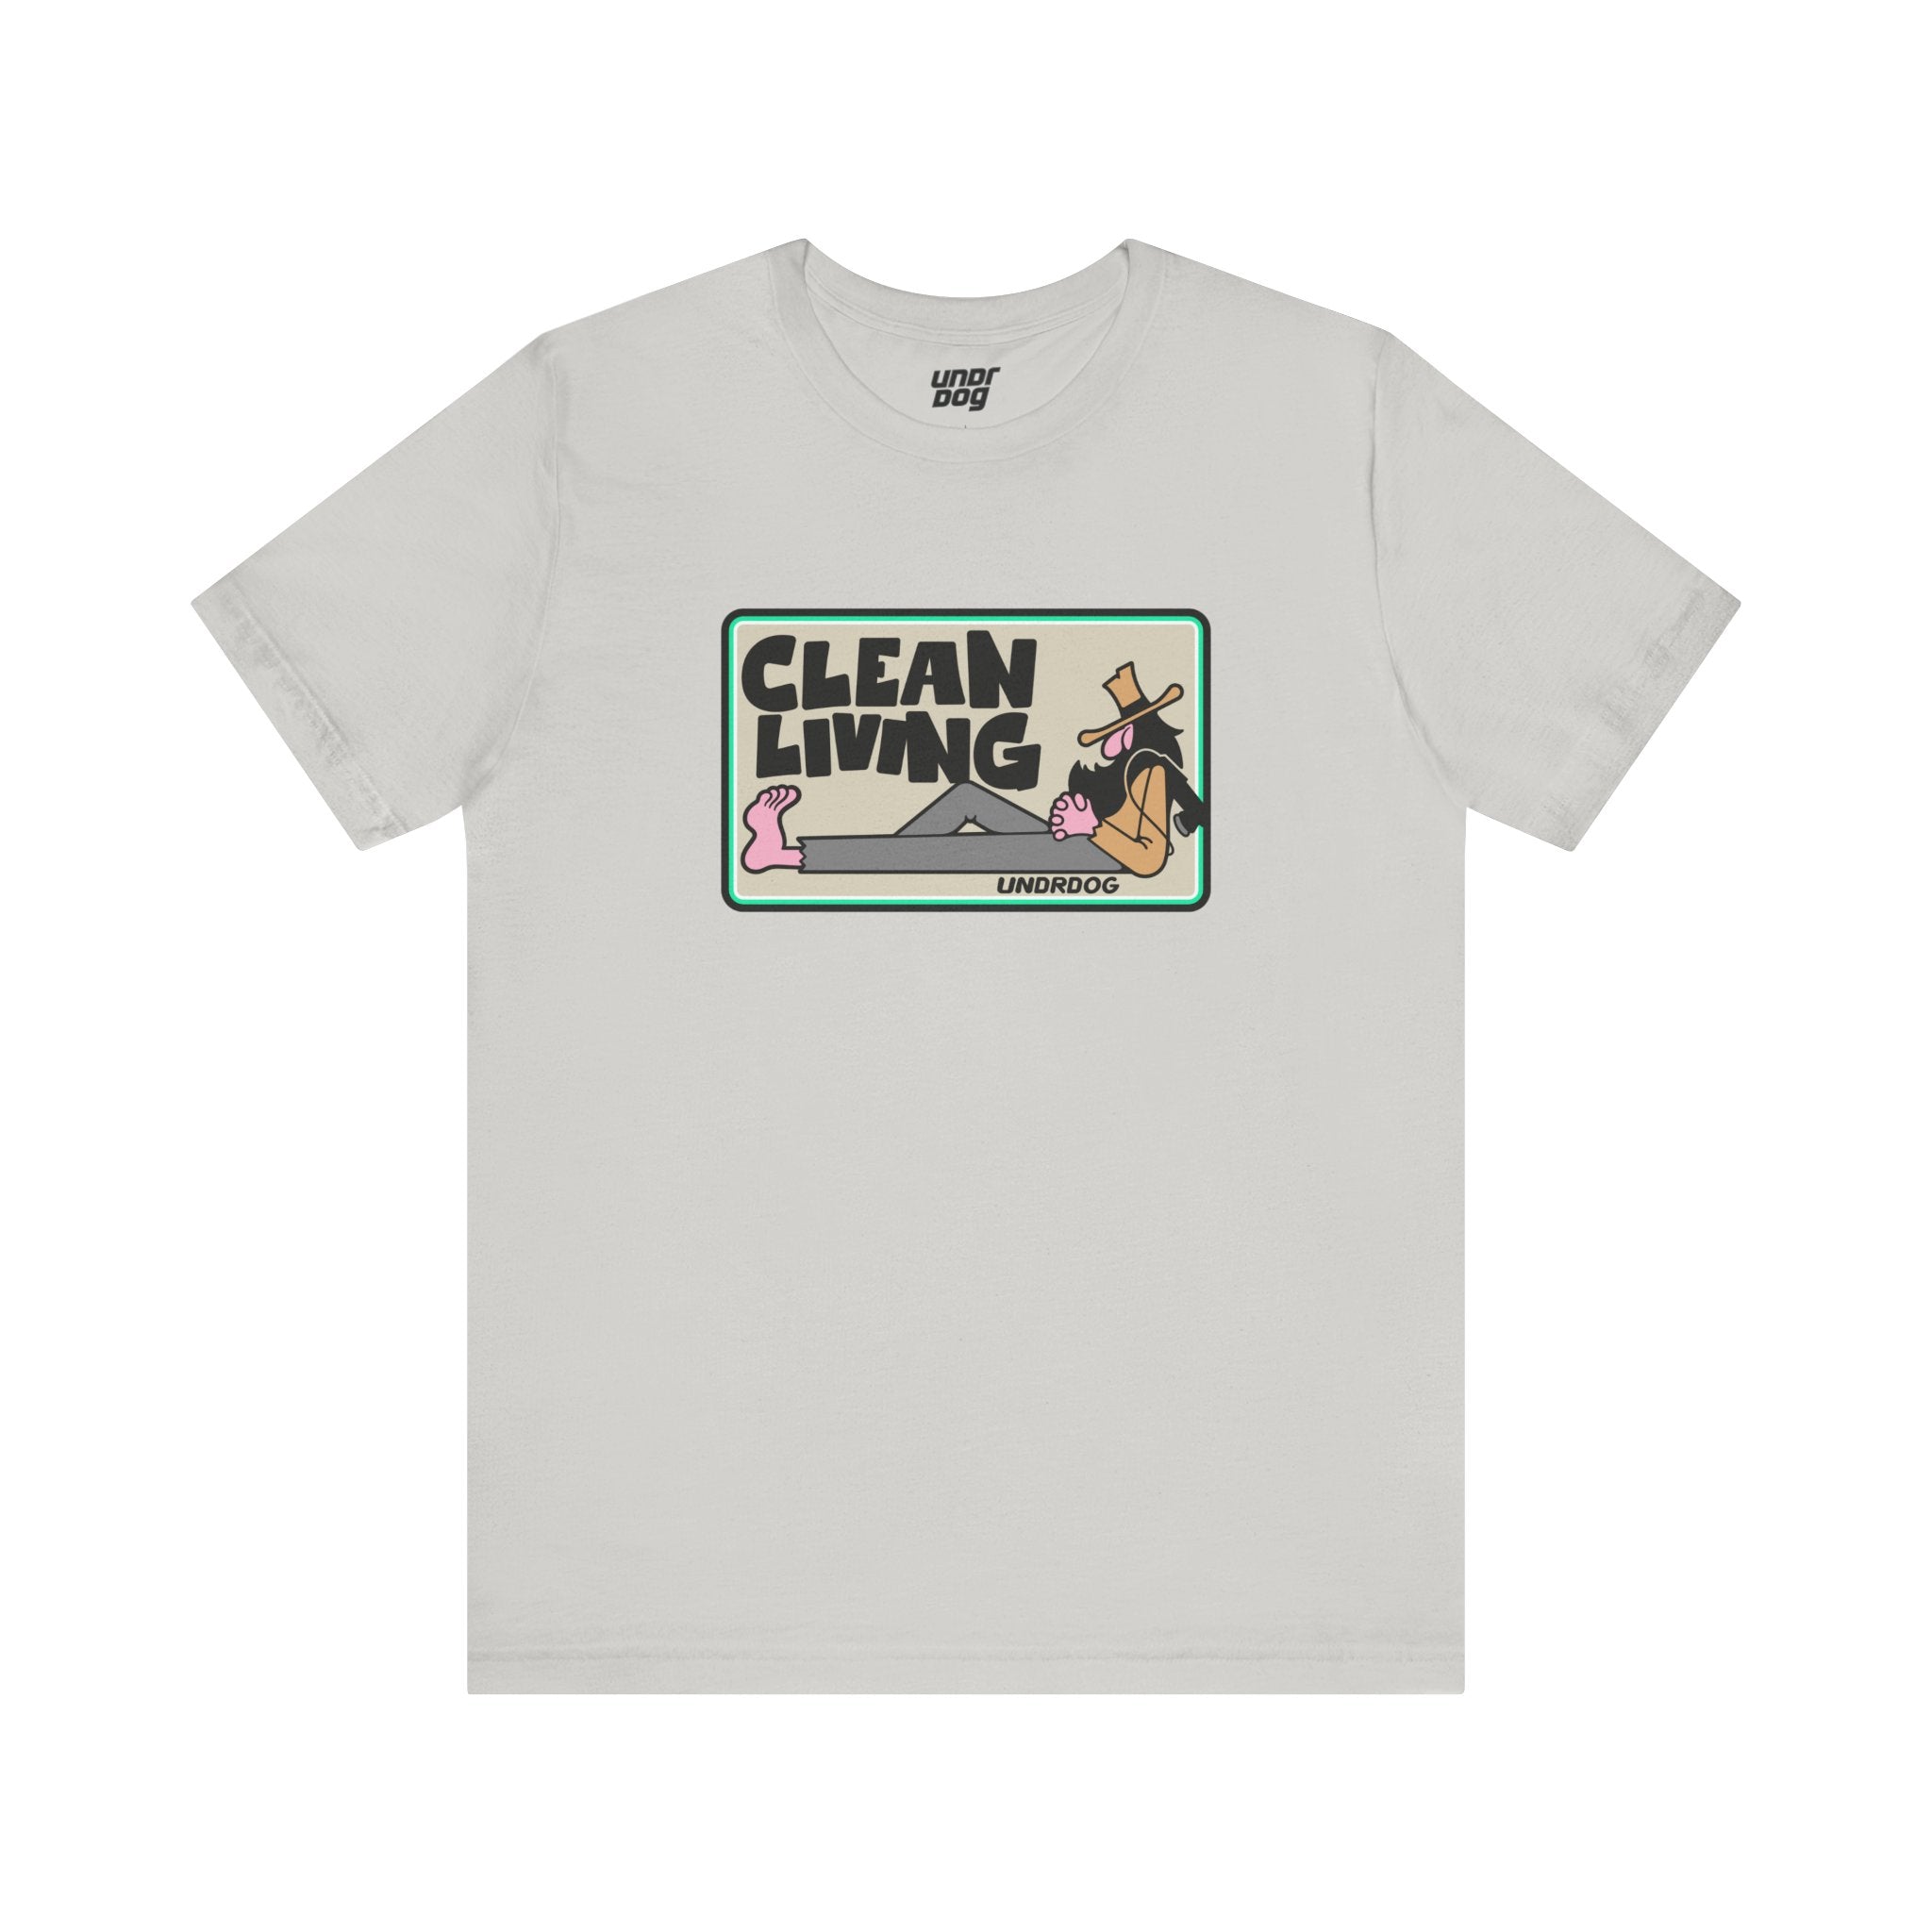 1597997636689179896_2048.jpg - Clean Living v3 by Undrdog Tee - Undrdog Surface Products